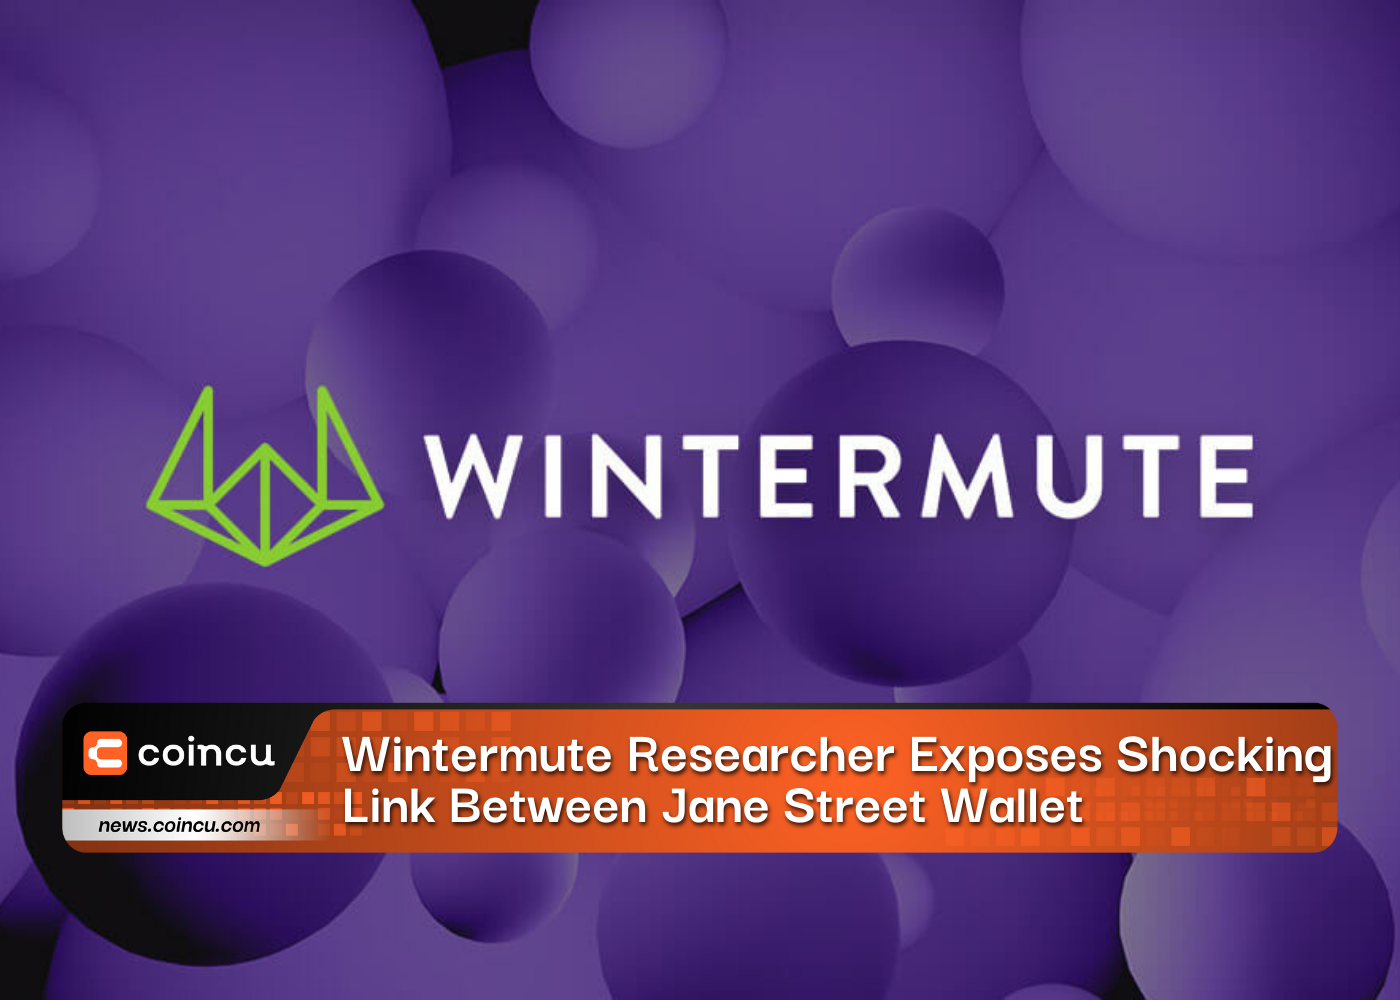 Wintermute Researcher Exposes Shocking